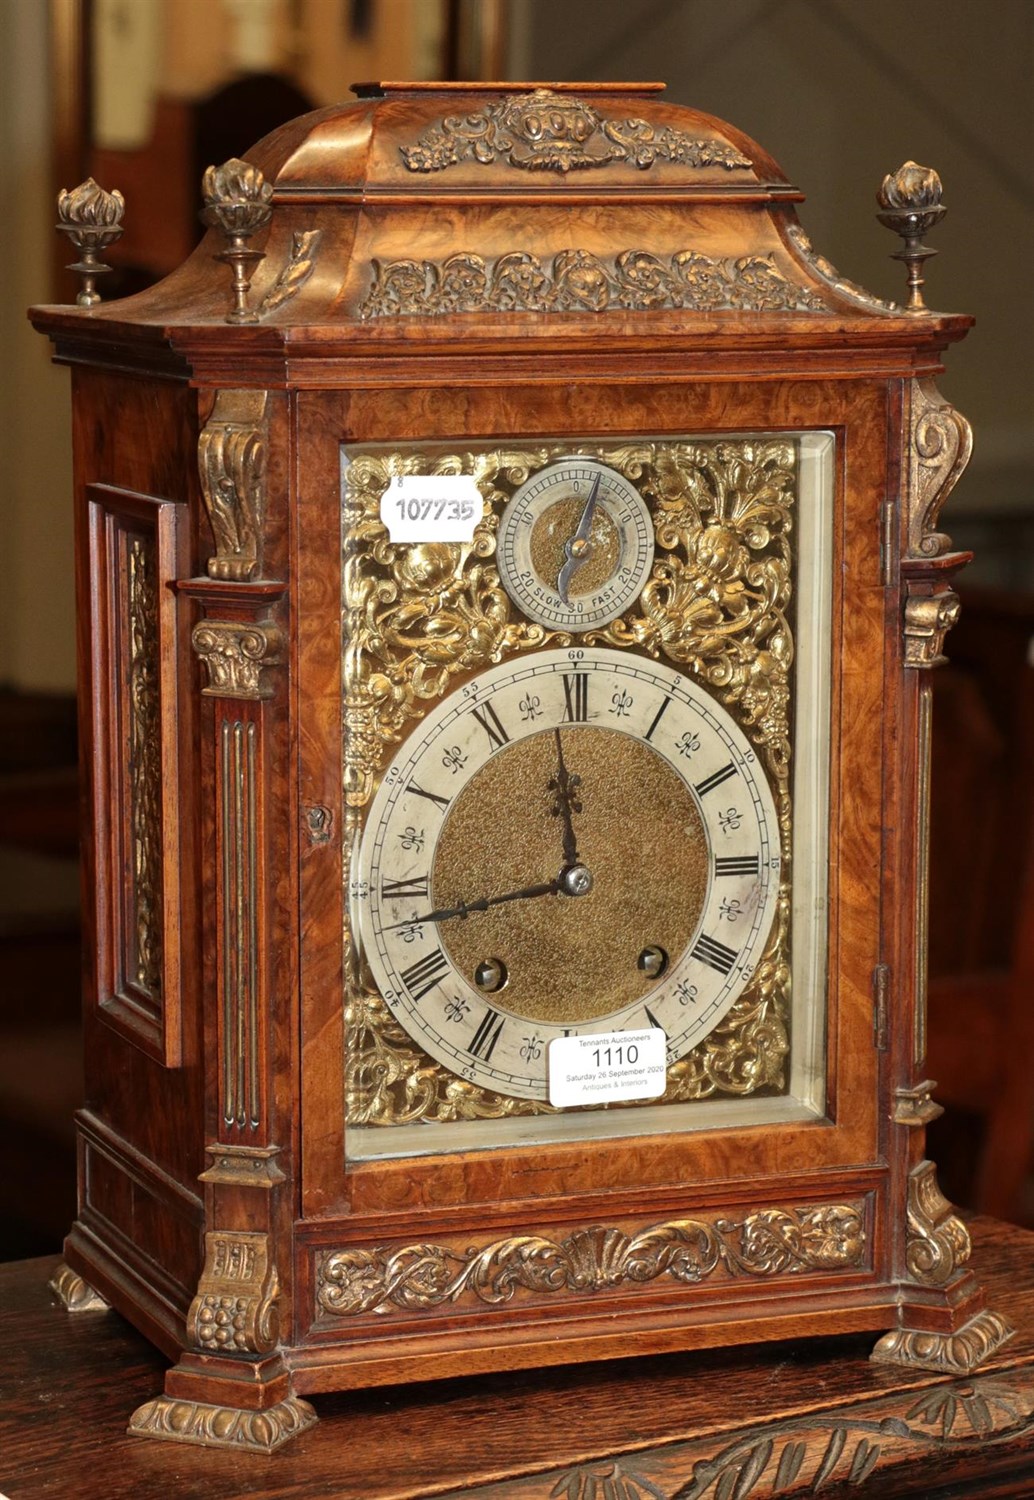 Lot 1110 - A late Victorian walnut quarter striking table clock, movement back plate stamped Lenzkirch